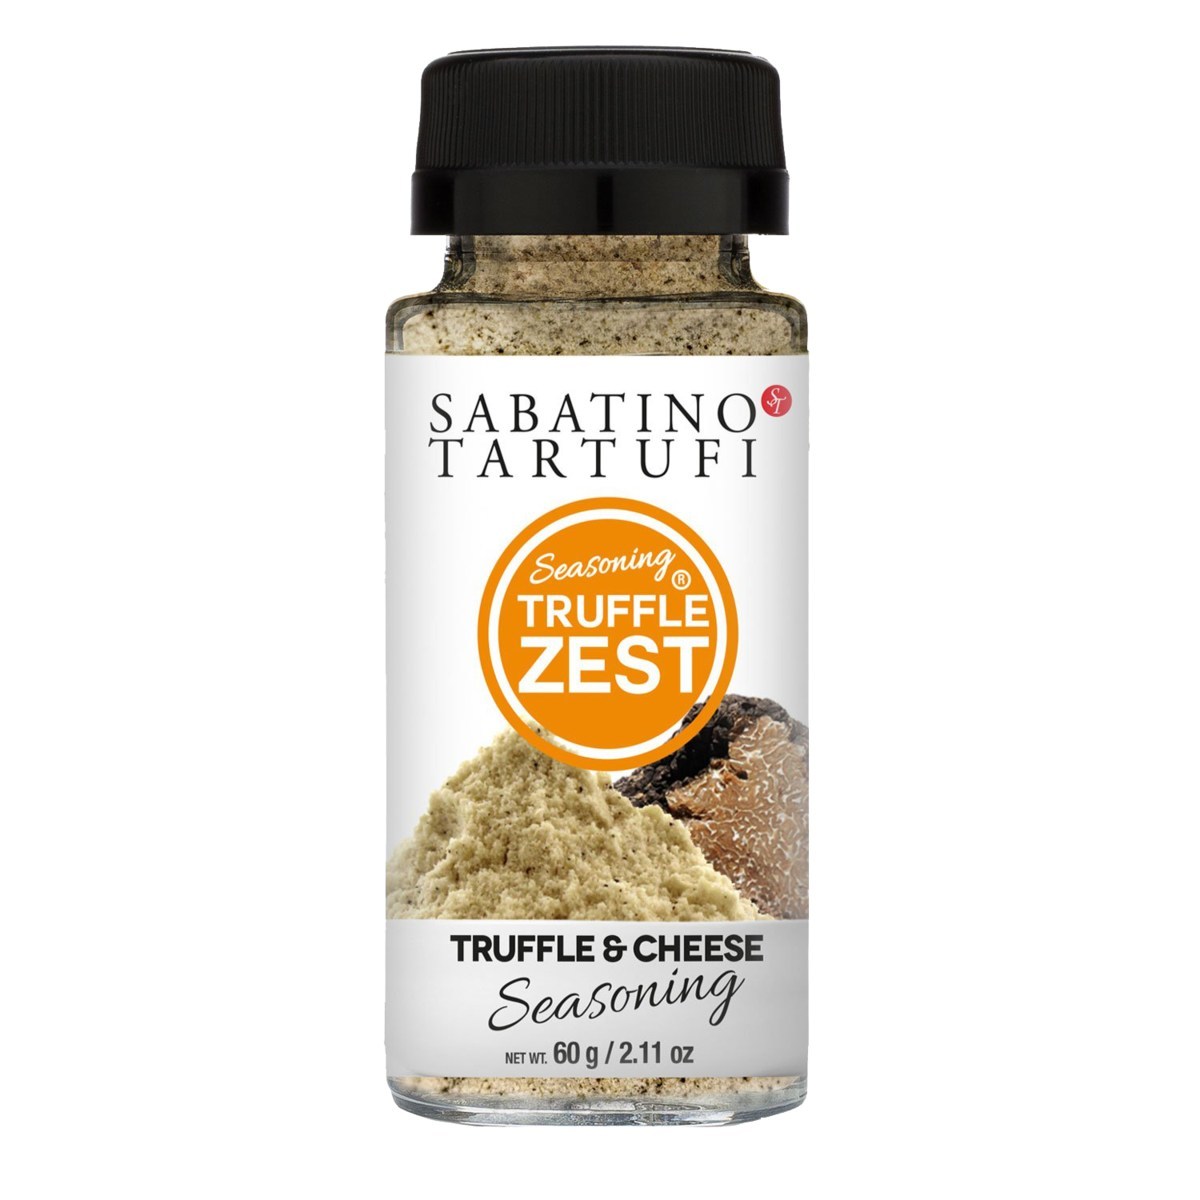 Sabatino Tartufi Truffle Zest® & Cheese seasoning combines the best-selling black truffle seasoning with premium pecorino cheese for a savory and nutty seasoning that will accentuate any pasta, pizza, or potato dish it is added to.